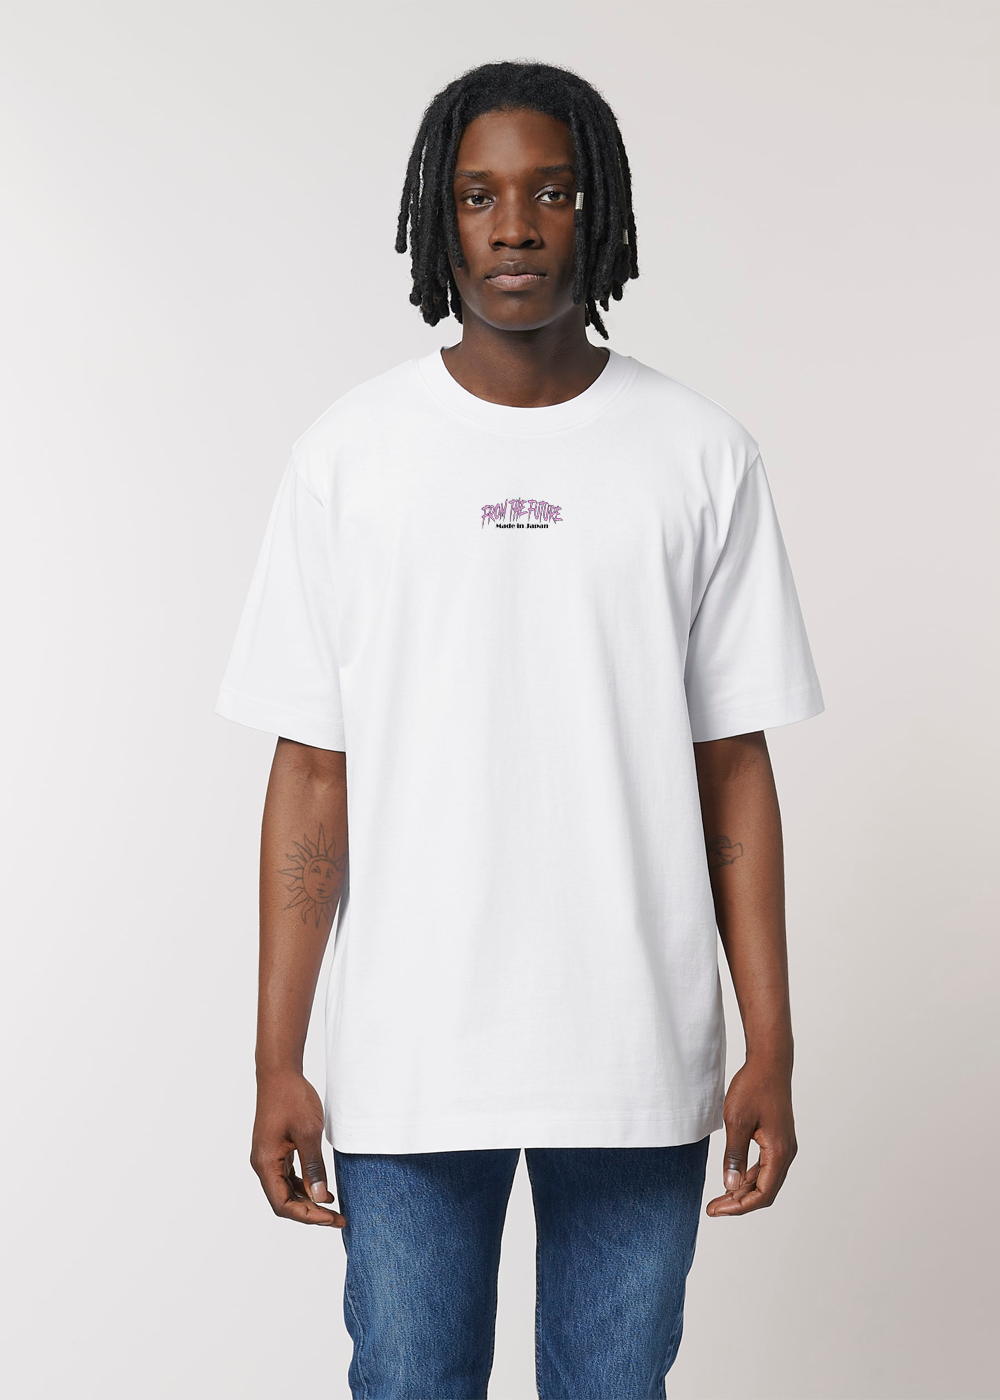 MADE IN JAPAN - FROM THE FUTURE® WHITE T-SHIRT